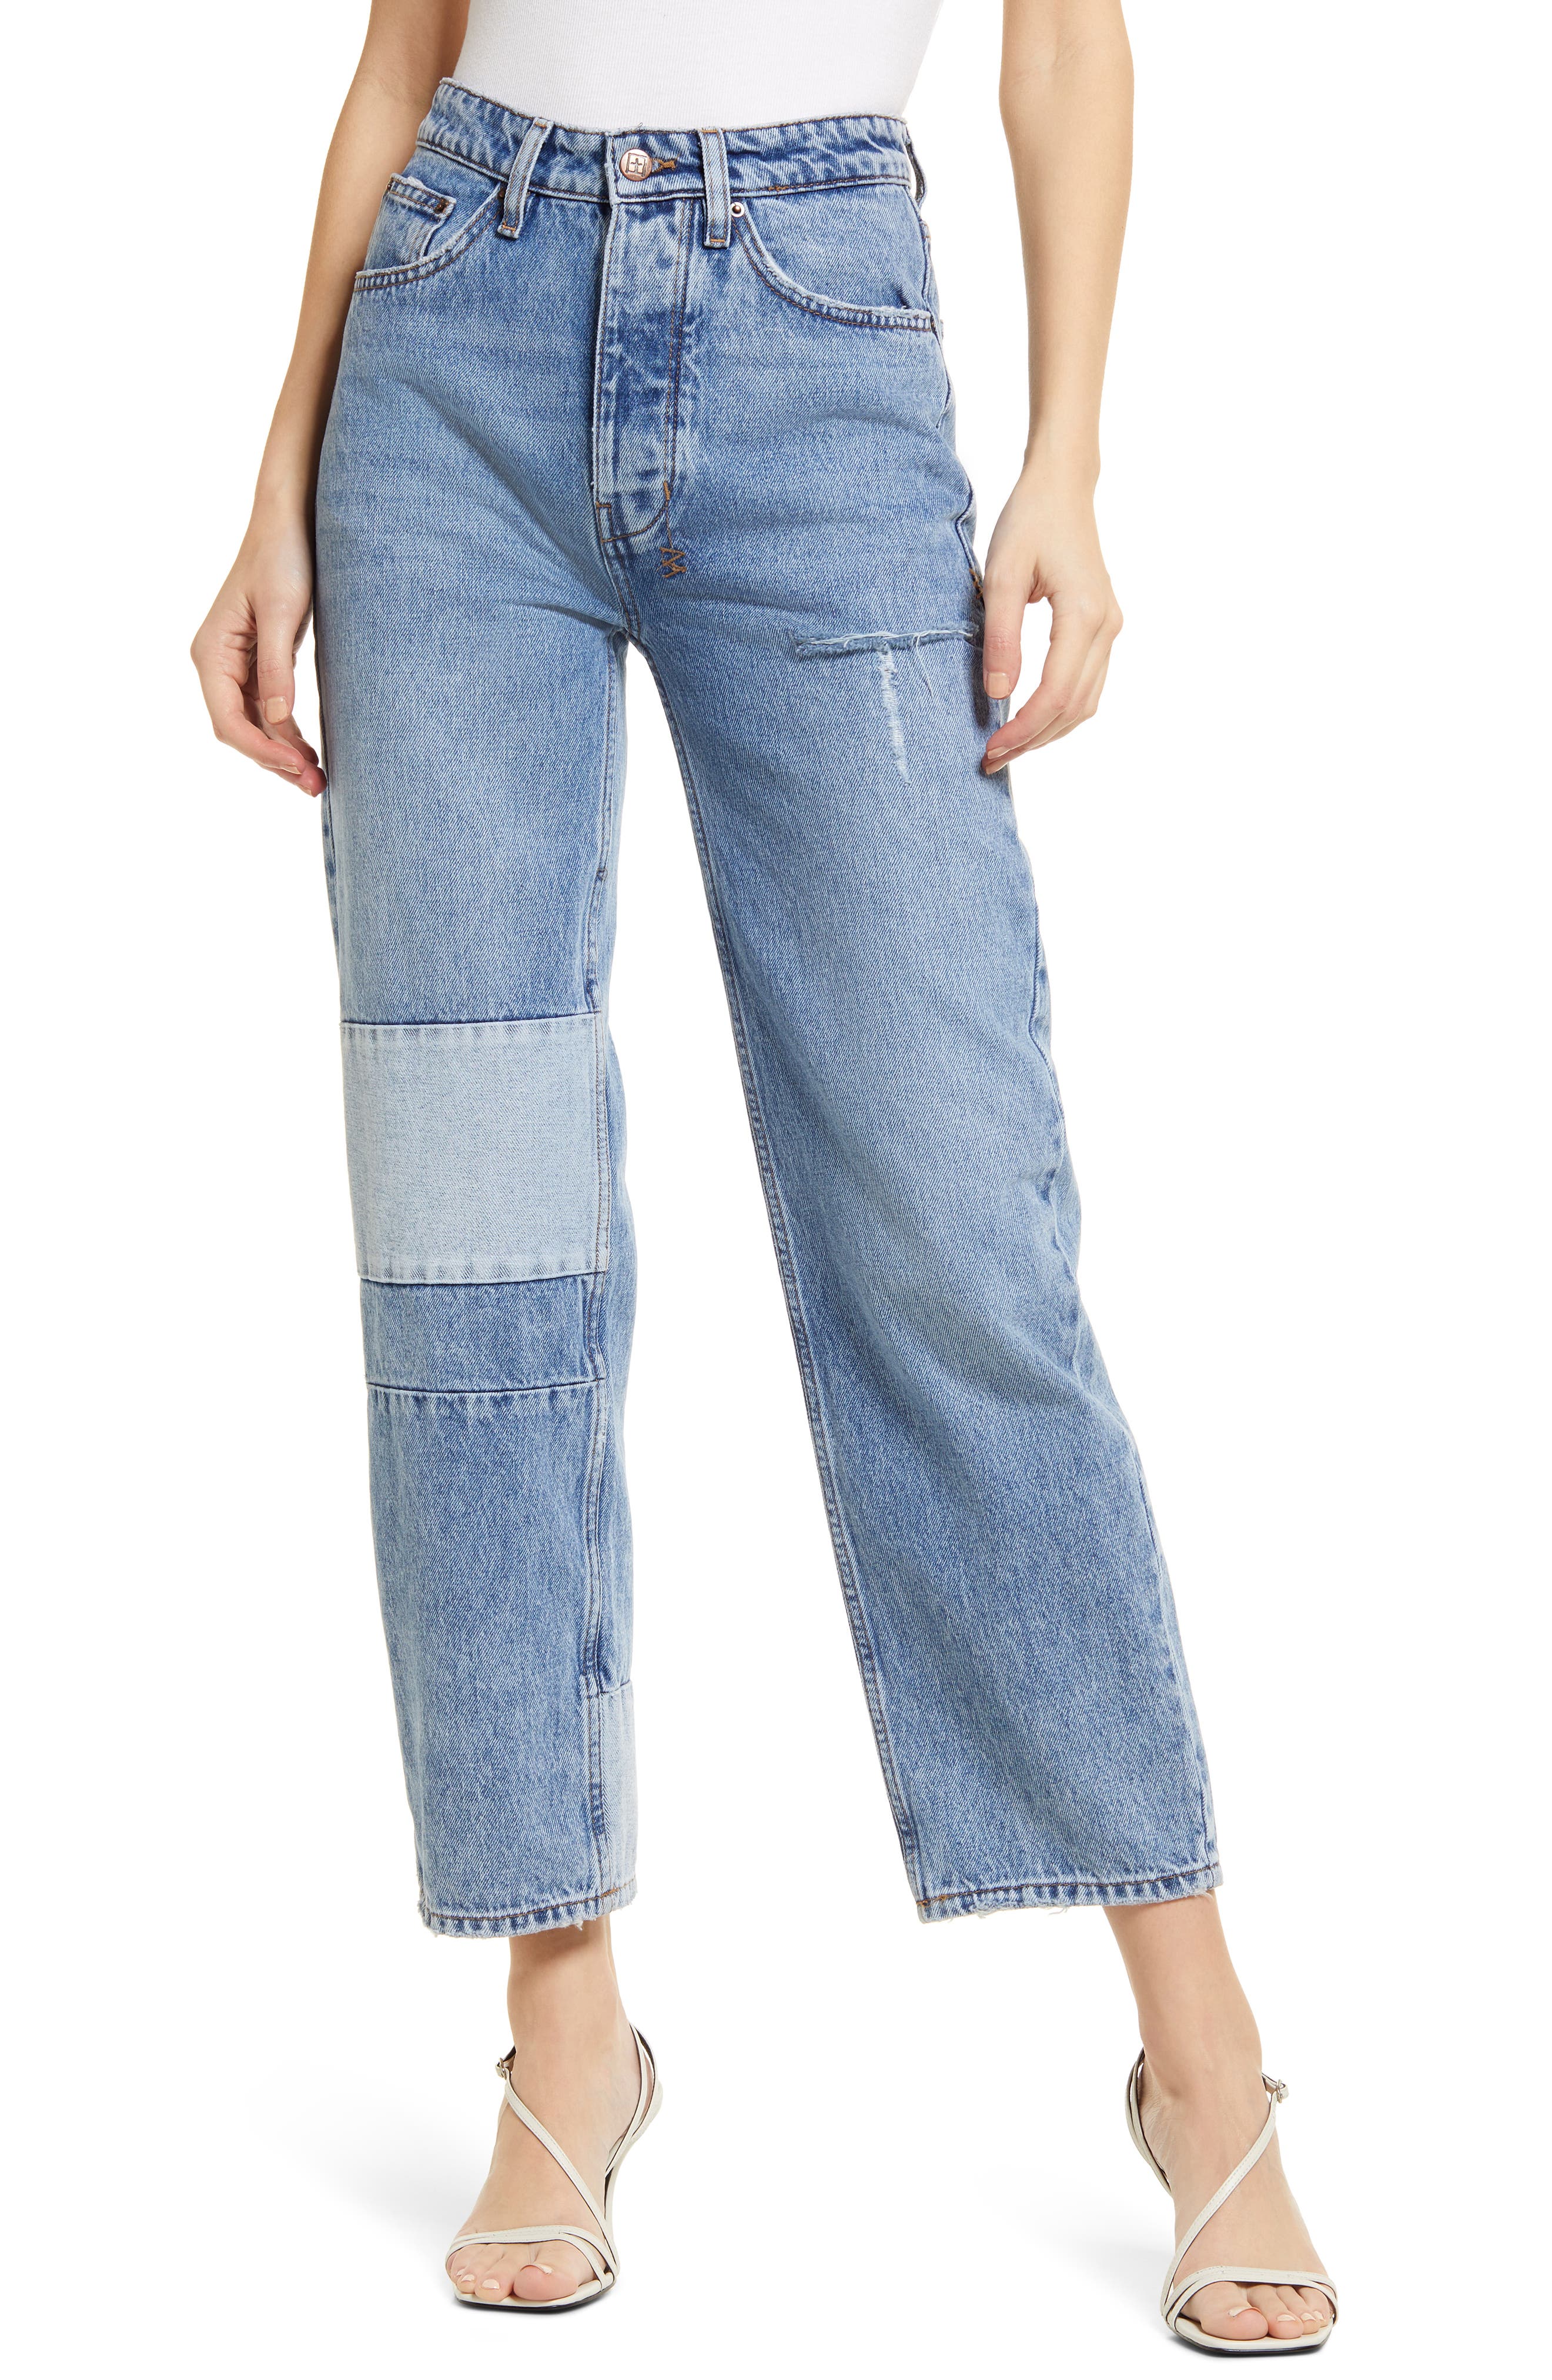 Ksubi Brooklyn Distressed Patchwork Straight Leg Nonstretch Jeans in Denim at Nordstrom, Size 30